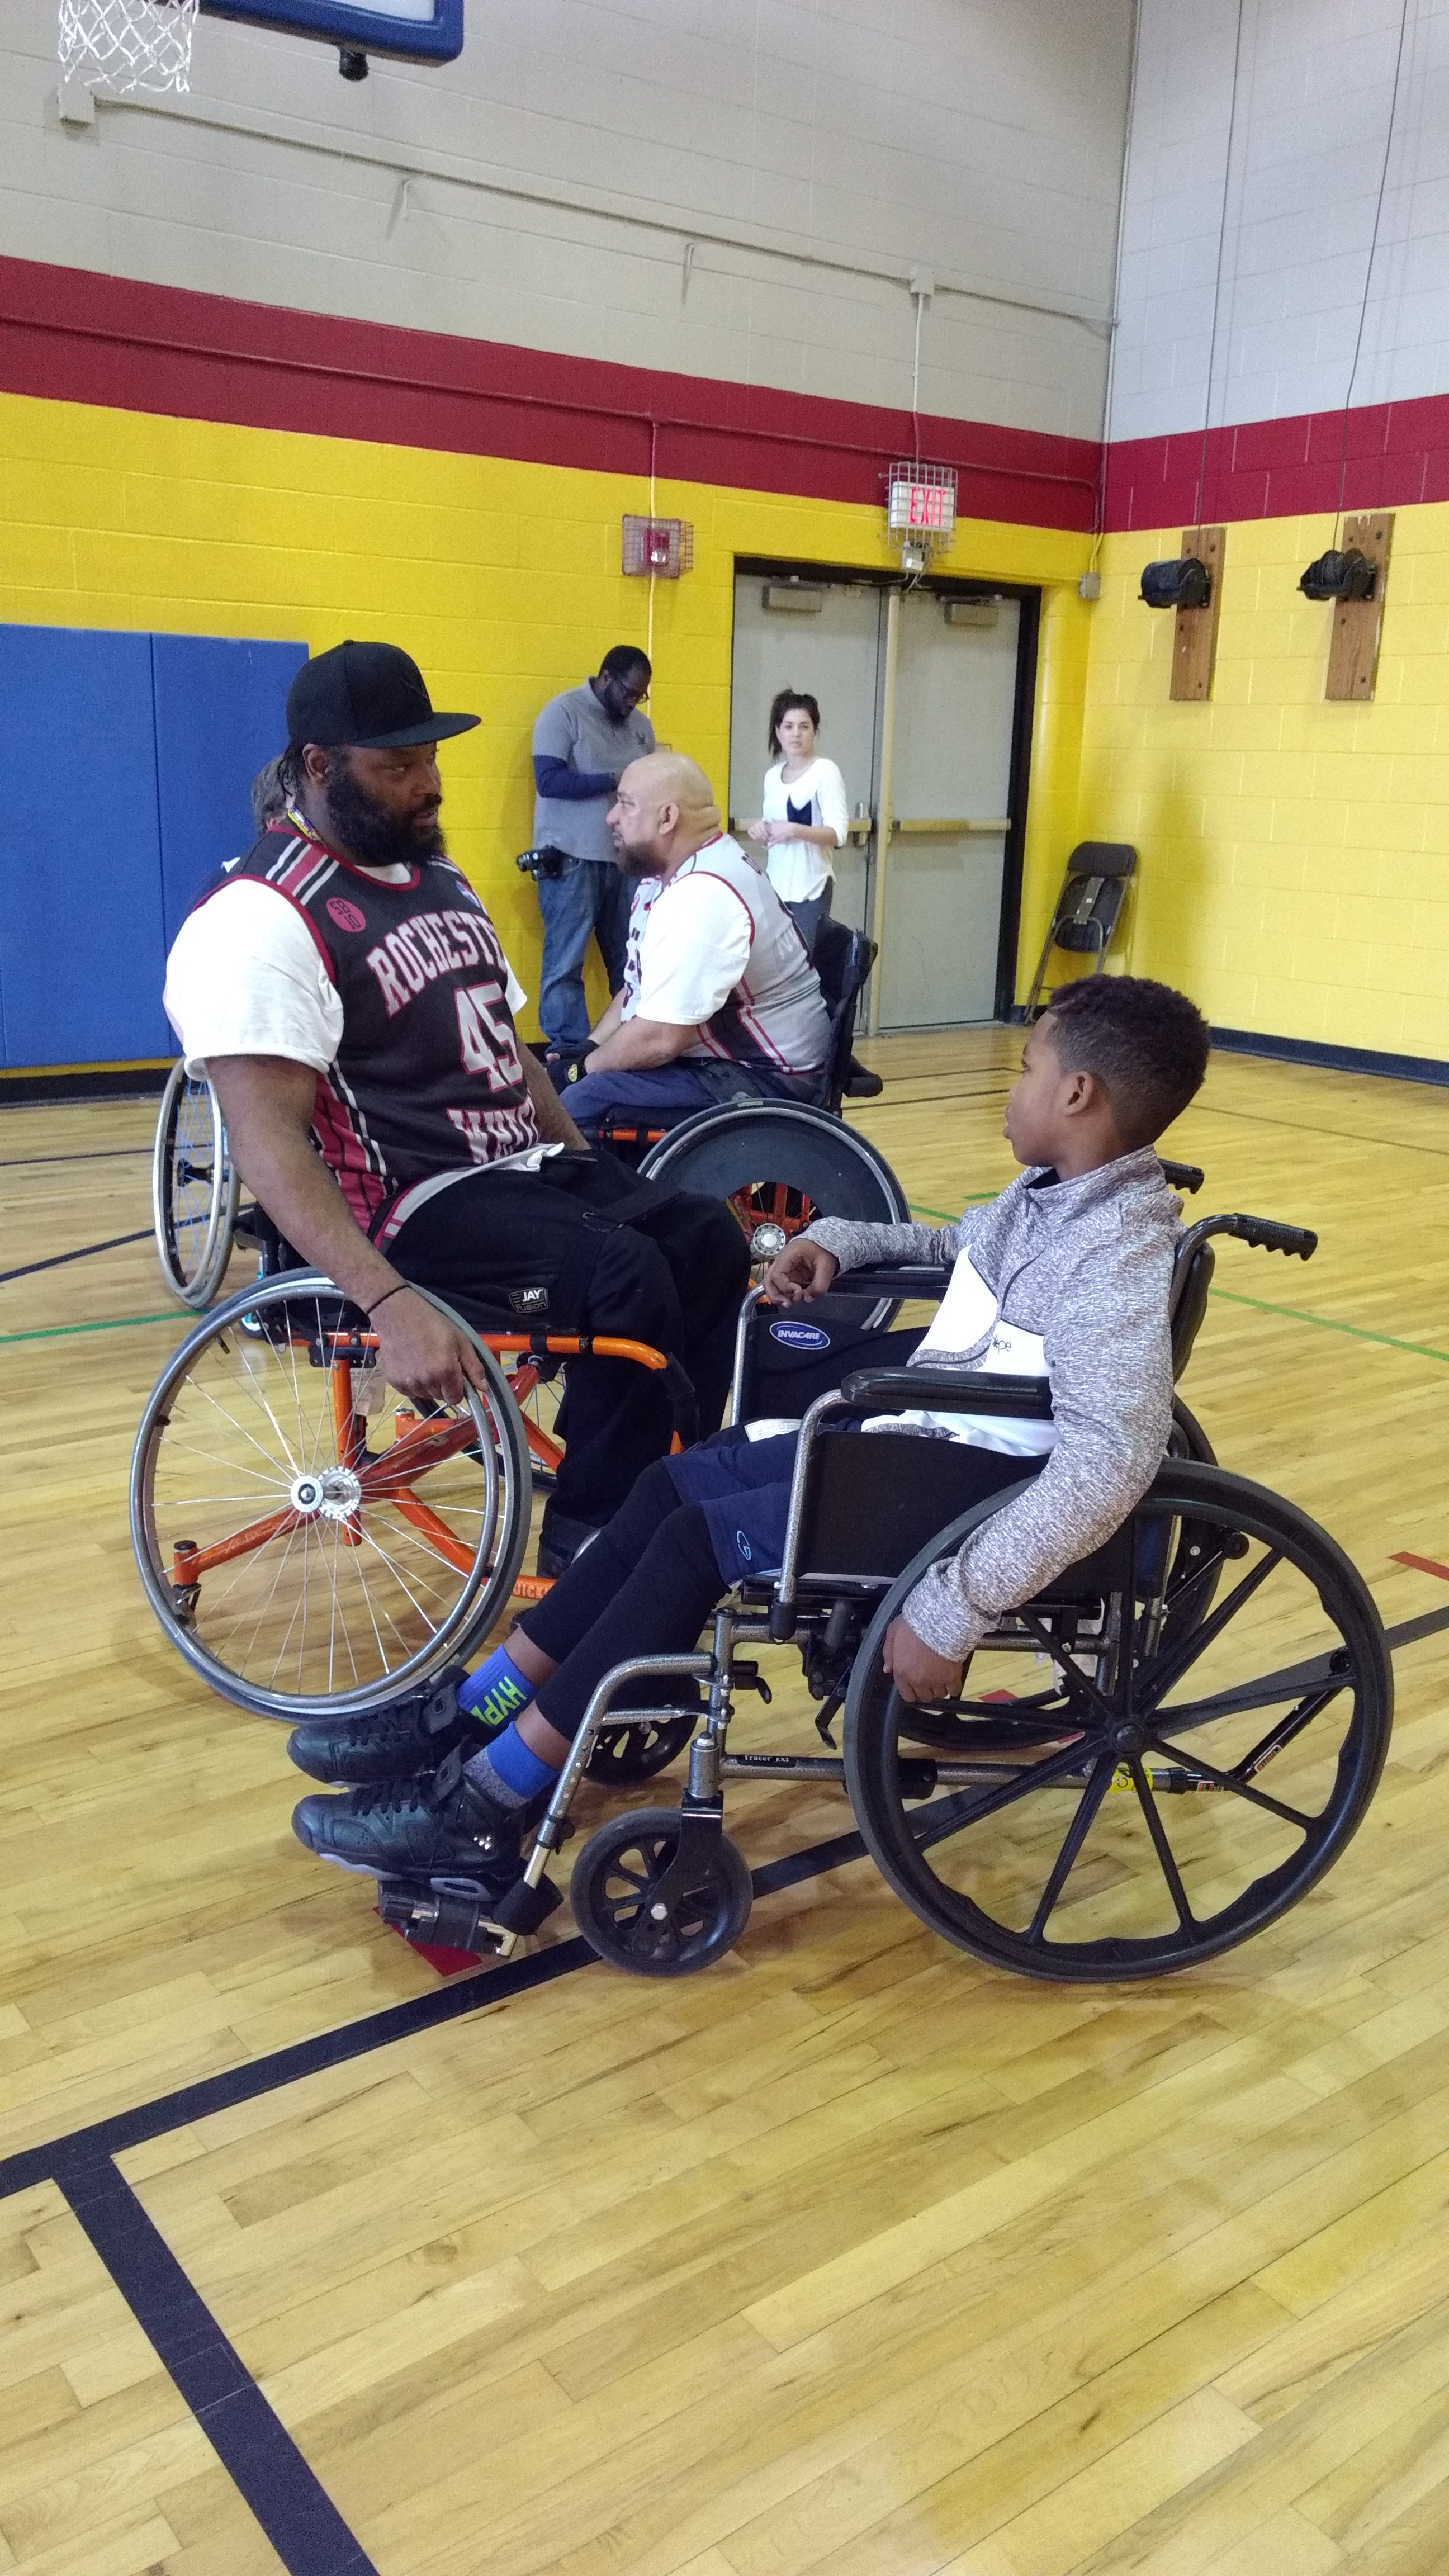 Wheelchair basketball player talks with youth in a manual chair about the game of wheelchair basketball